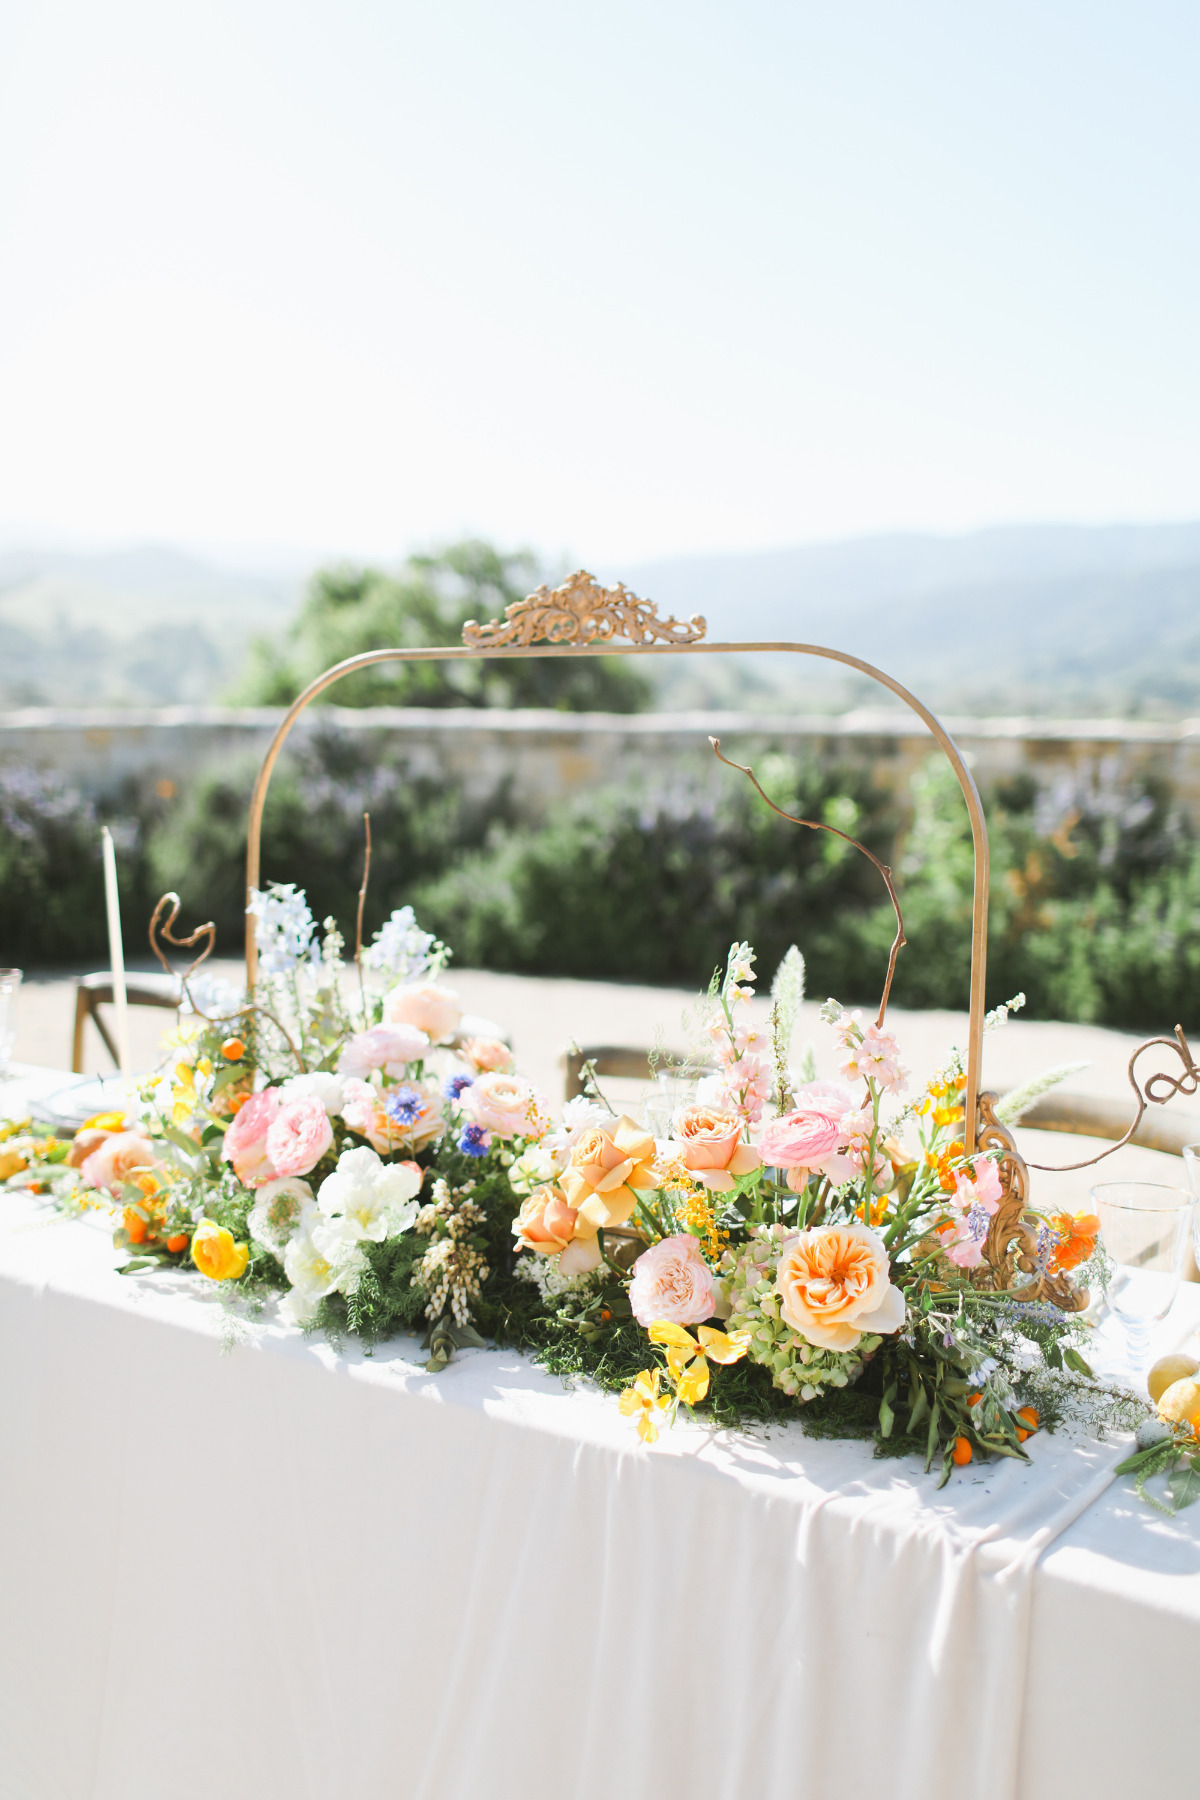 The Floral Installation at this Winery Wedding Shoot Sure was Peachy-Keen